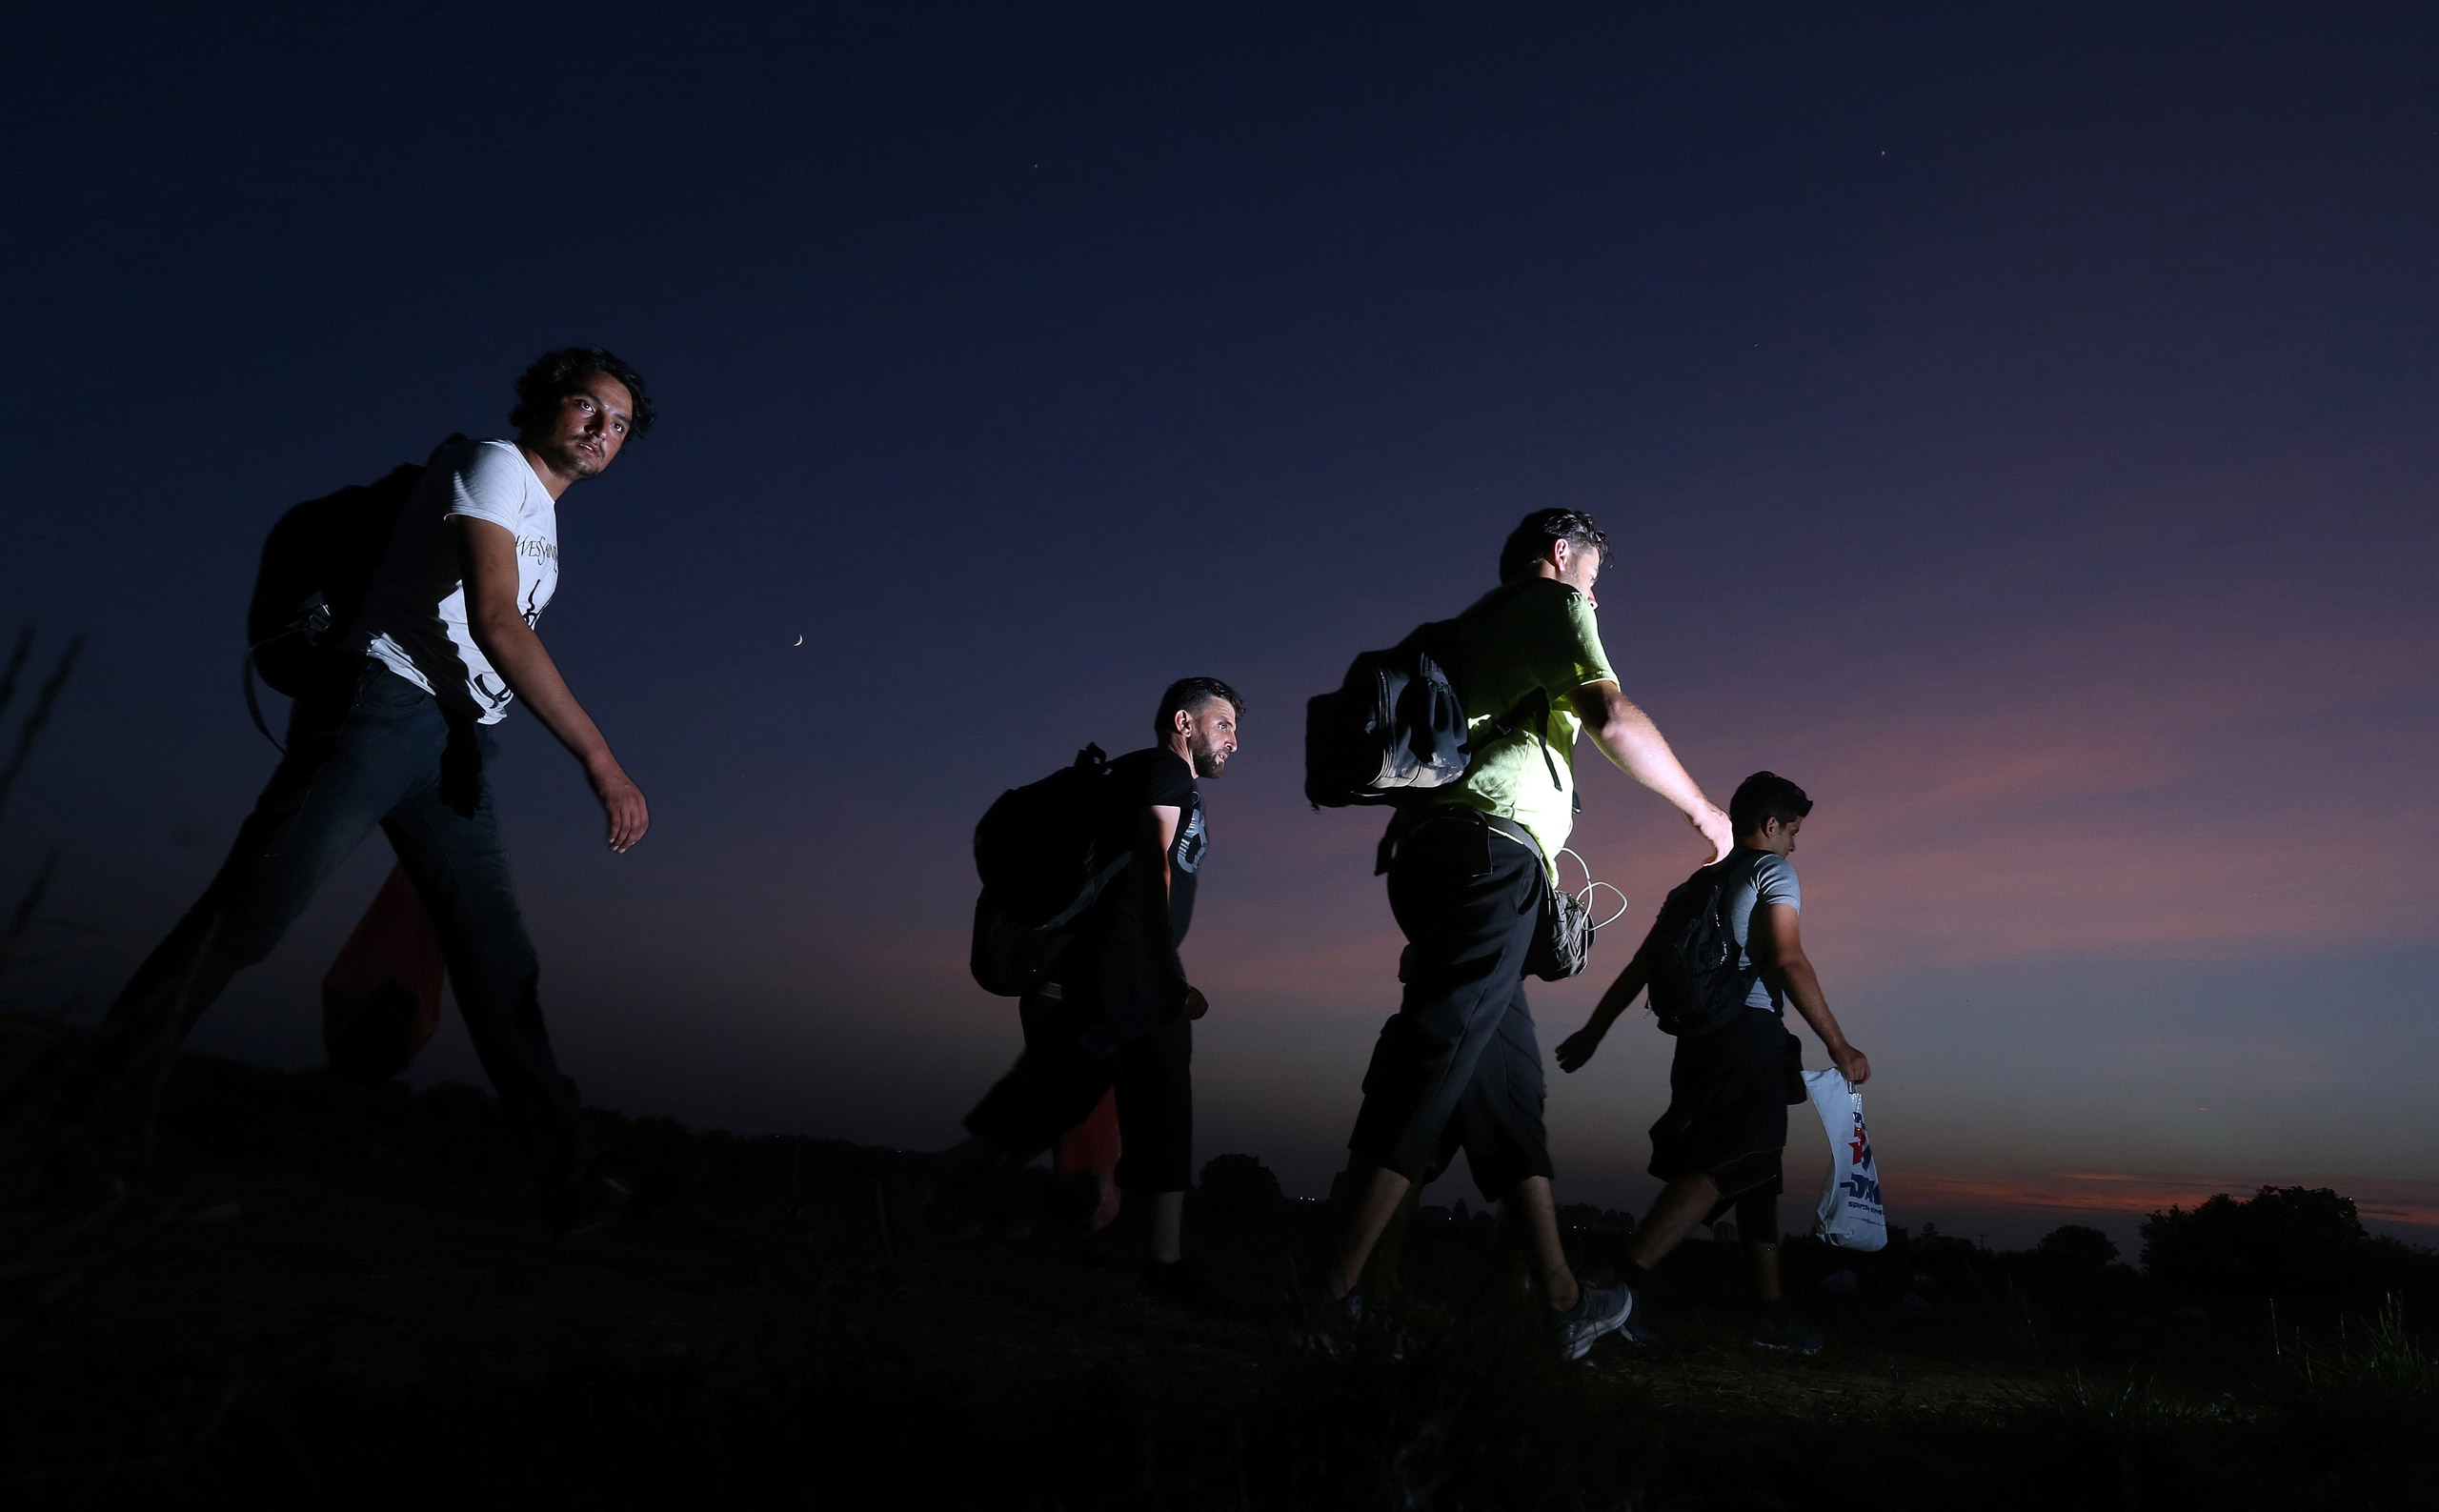 Migrants walk towards the eastern-Croatia town of Tovarnik, close to the border between Croatia and Serbia, on September 18, 2015. Migrants have begun carving a new route into the Schengen area, traveling via Croatia, after neighboring Hungary, overwhelmed by the refugee traffic, fenced off its own border with Serbia. For the moment, Croatia copes well with the influx of refugees, being still able to keep evidence of the people arriving and transporting them by train to refugee transit centers closer to nation's capital, Zagreb. AFP PHOTO / STRSTR/AFP/Getty Images